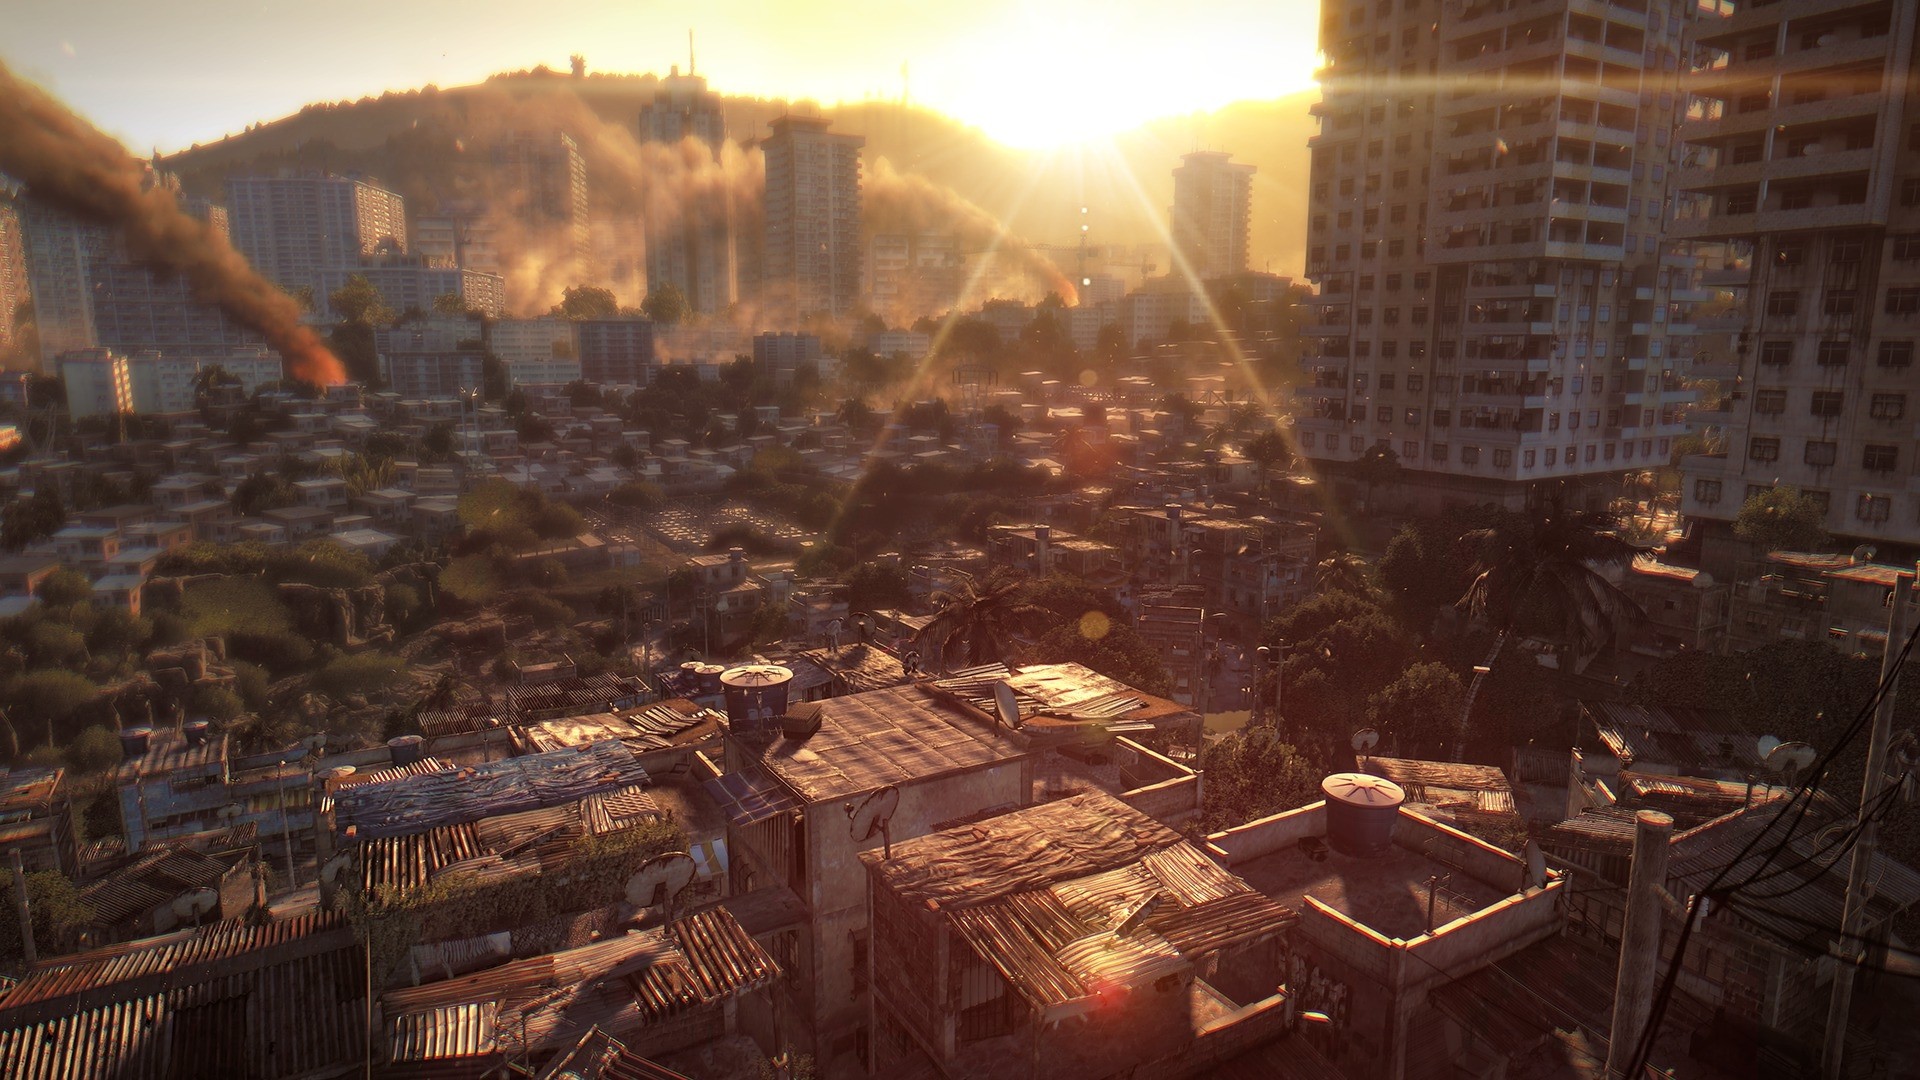 1920x1080 Free Dying Light Wallpapers #2E3TH82